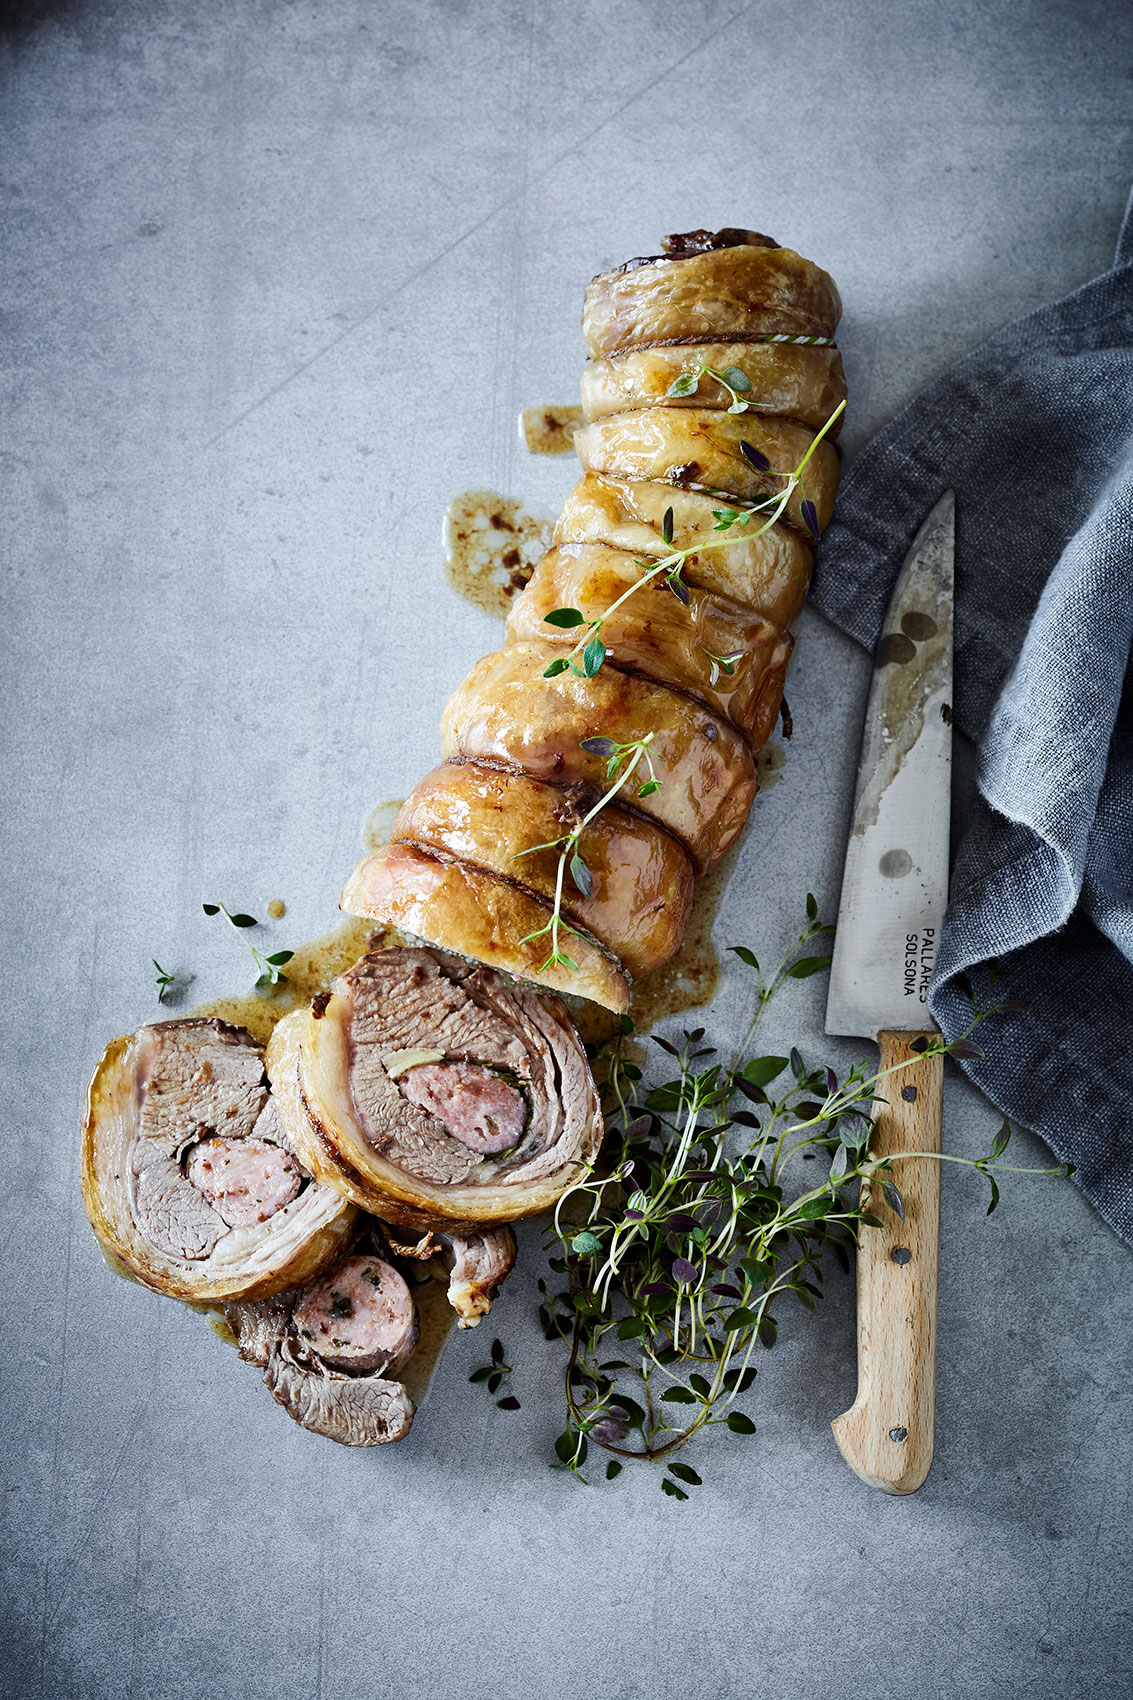 Slow Cooked • Sliced Lamb Loin with Fresh Thyme on Stone Counter • Cookbook & Editorial Food Photography